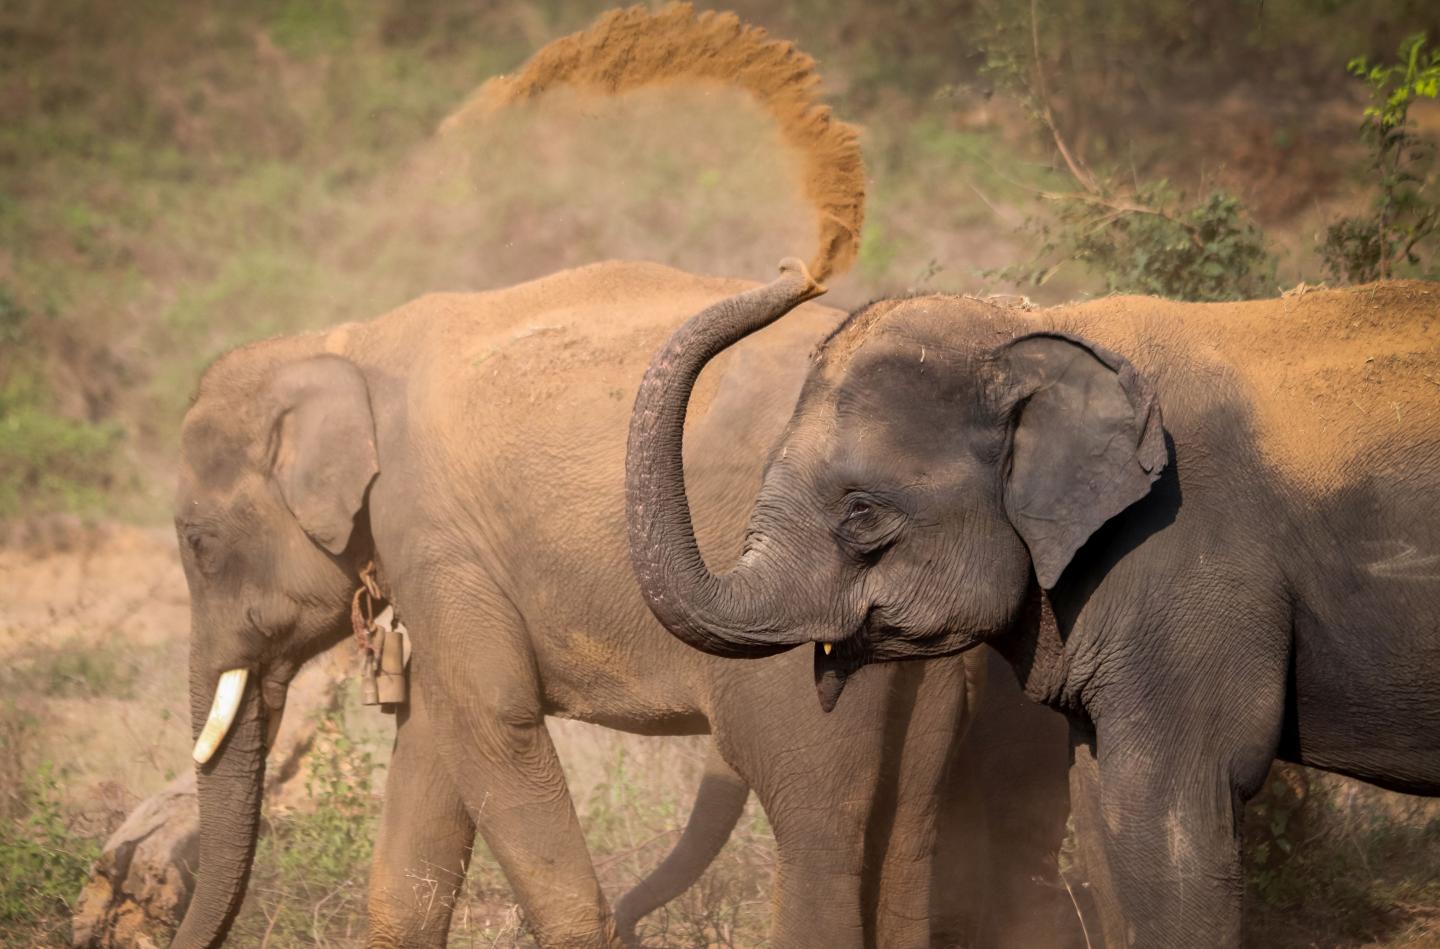 Are elephants male or female?